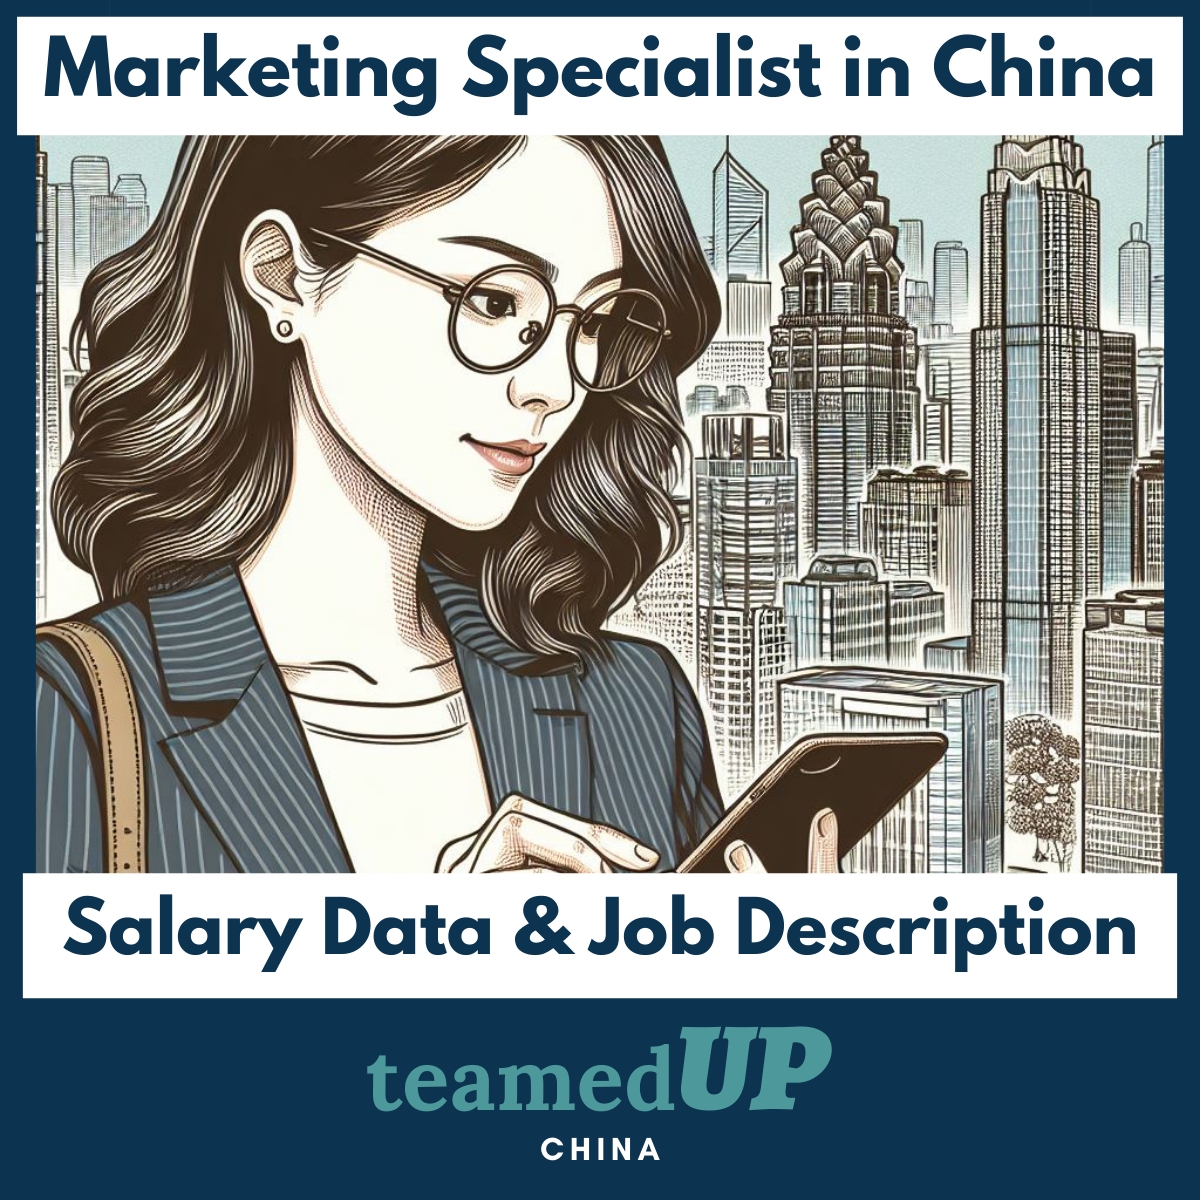 Marketing Specialist in China - Average Salary and JD - TeamedUp China